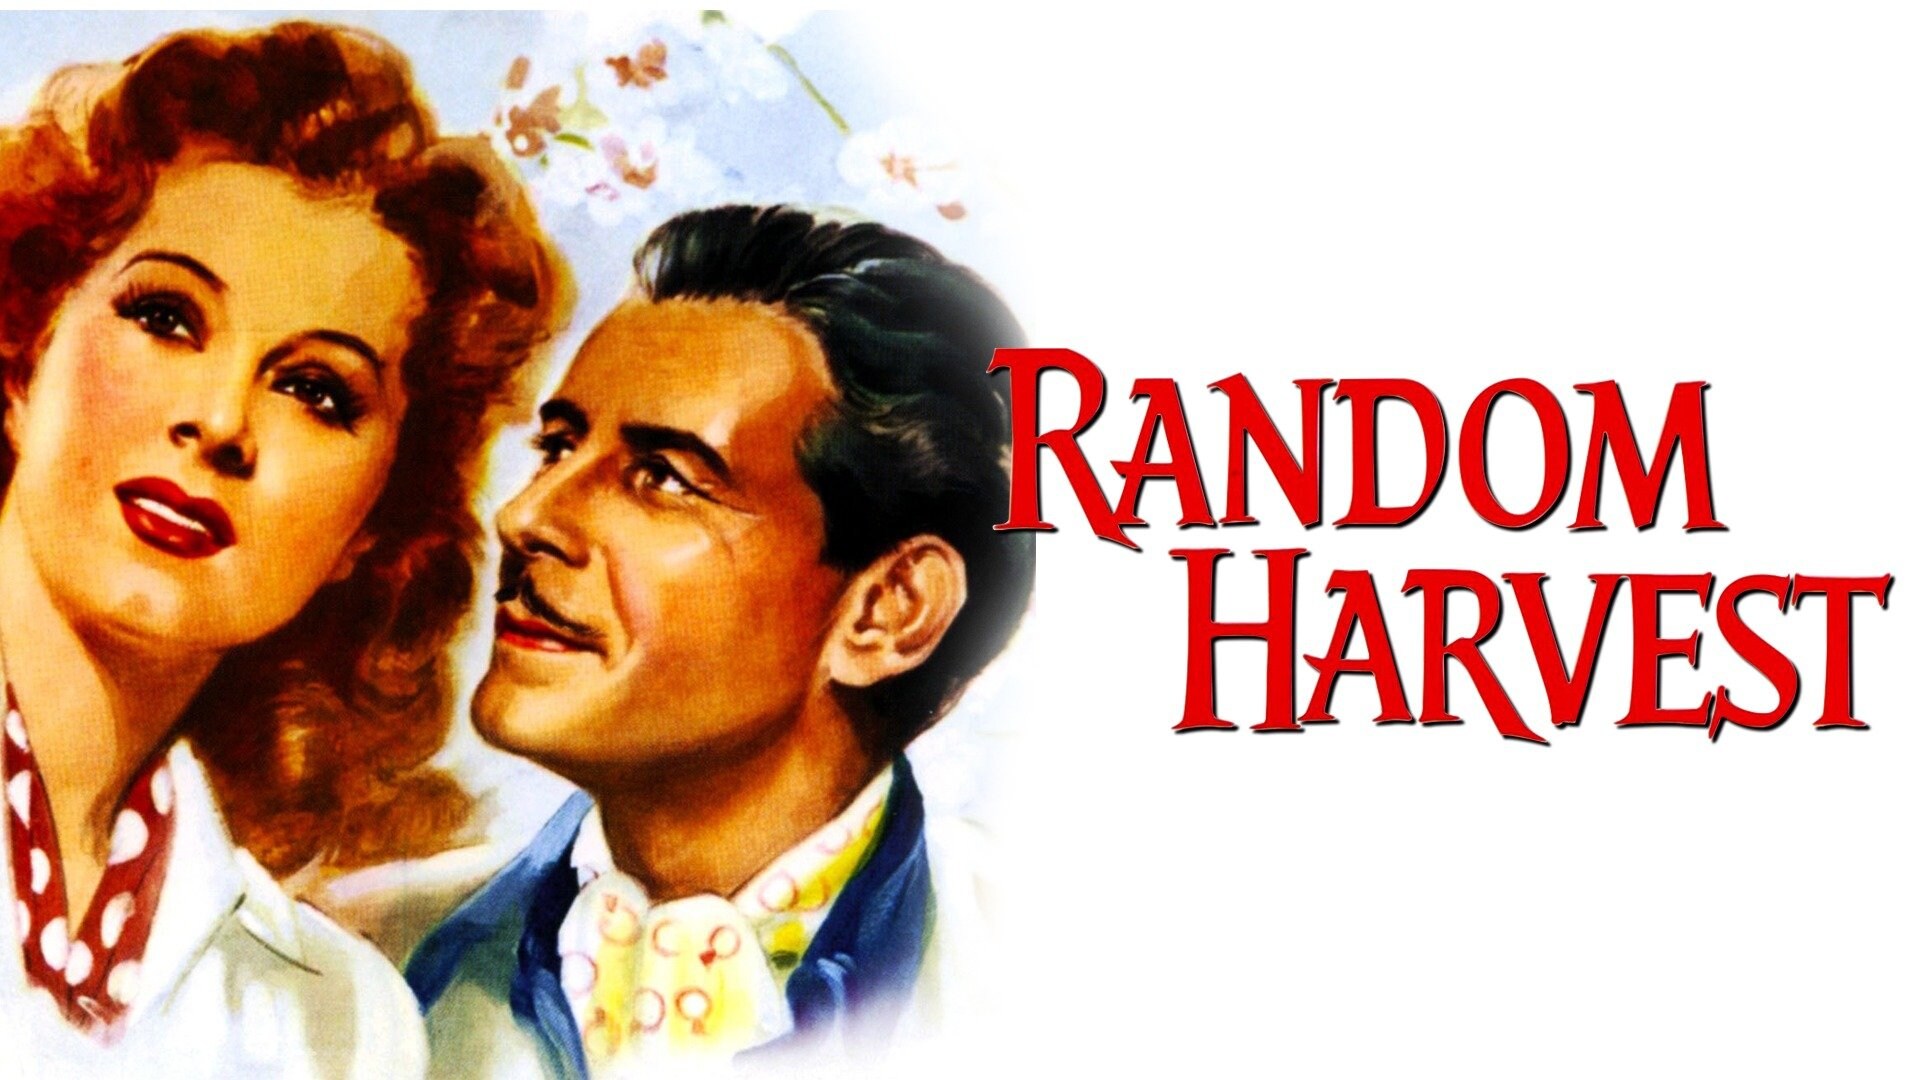 38-facts-about-the-movie-random-harvest